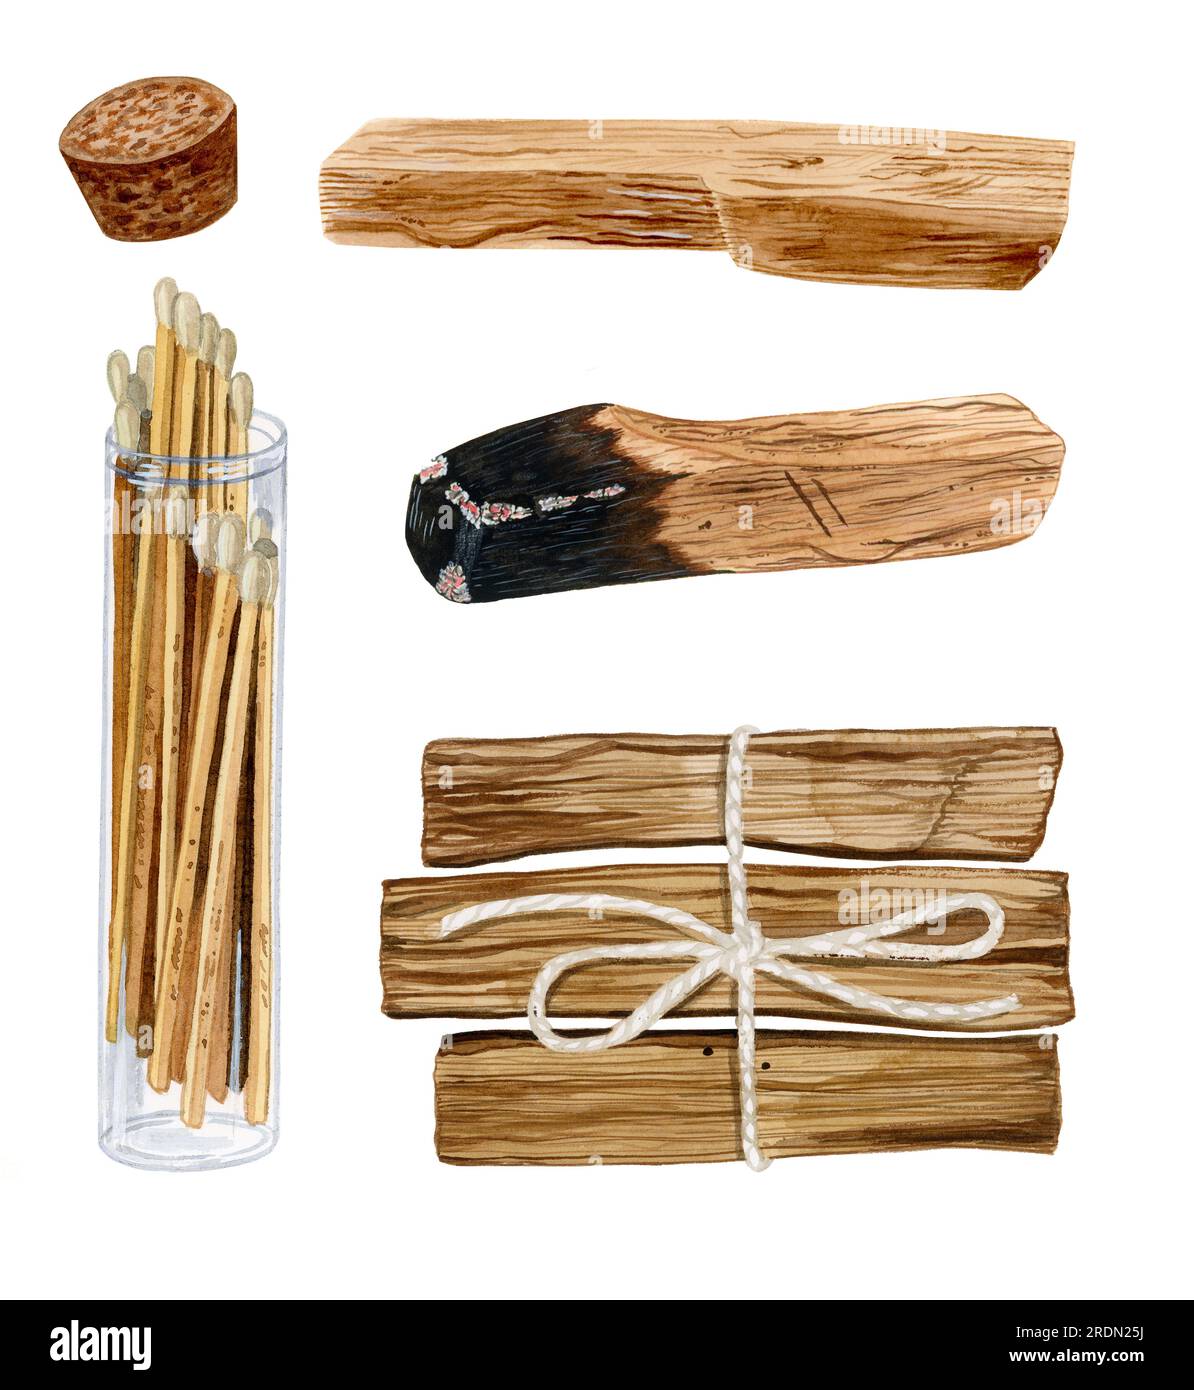 A set of an opened glass bulb with matches, new Palo Santo stick, burnt Palo Santo stick and a bunch of three new Palo Santo sticks Stock Photo